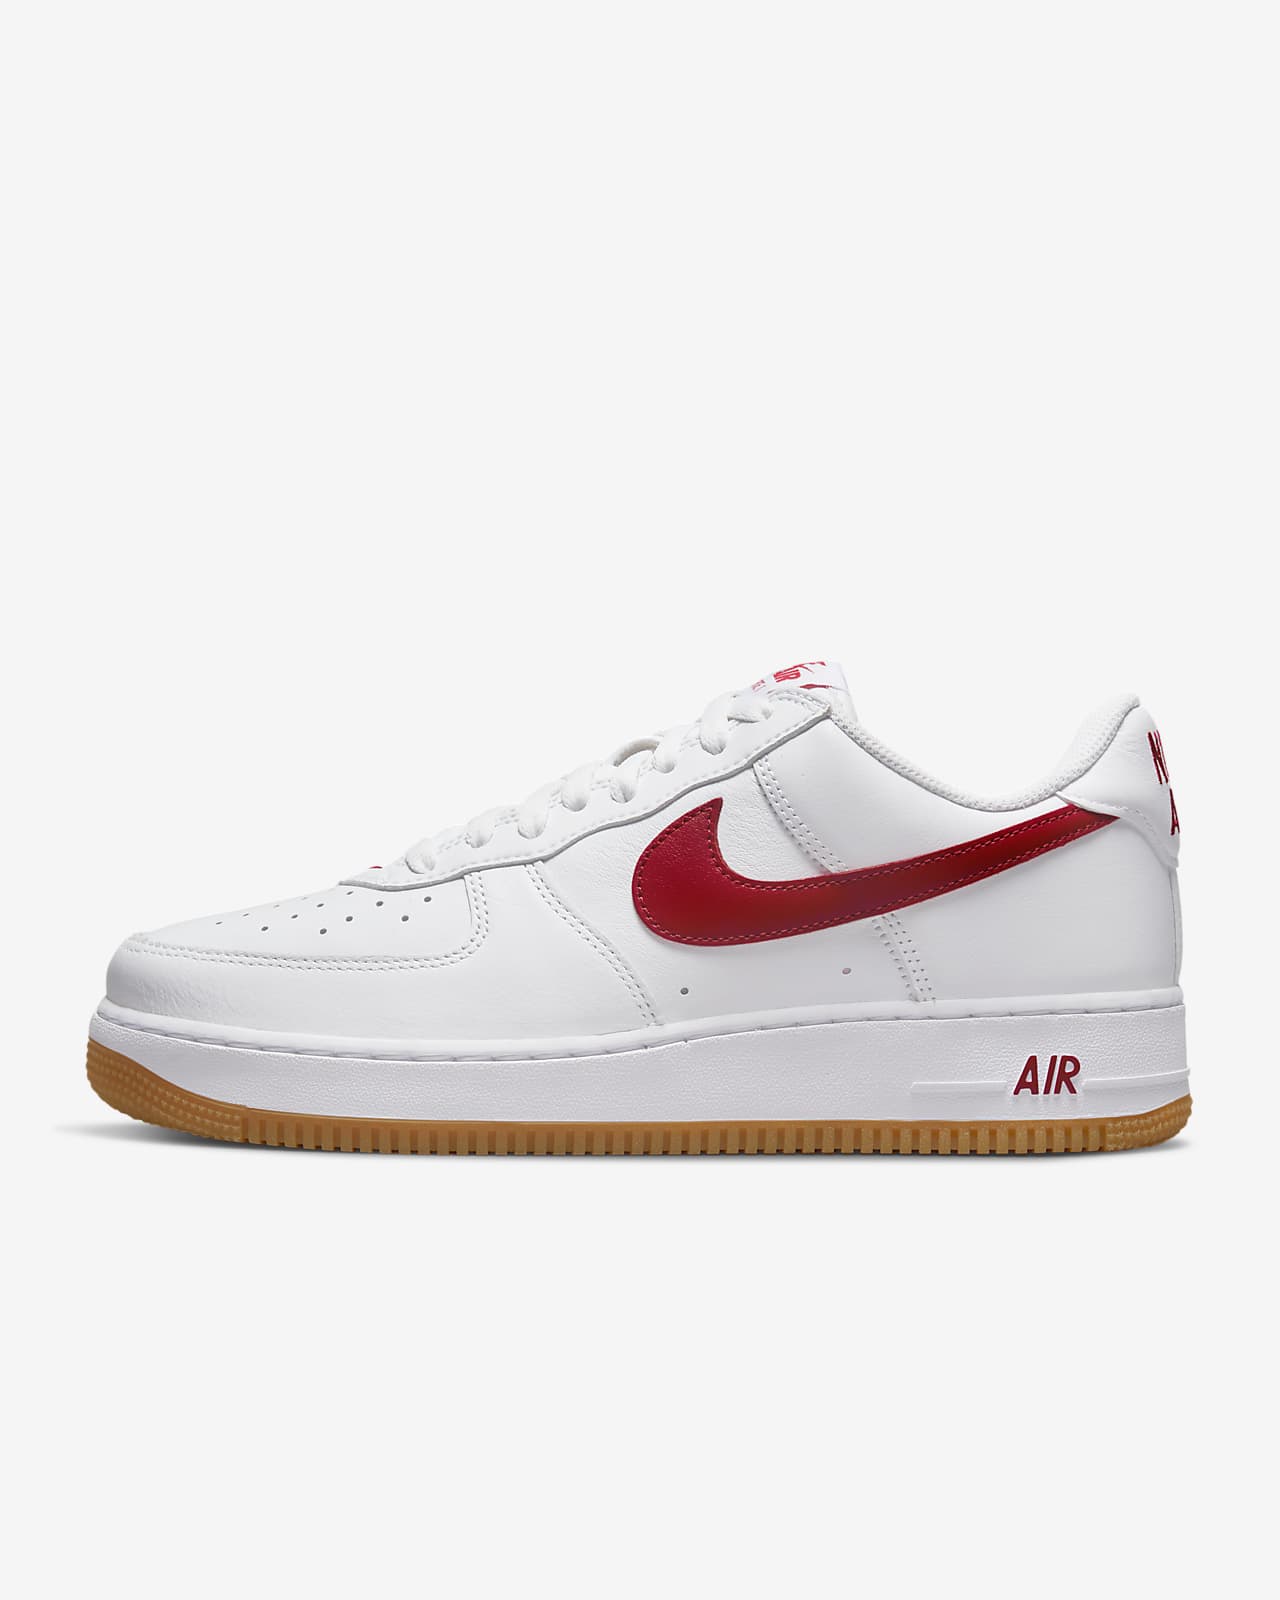 Nike Air Force 1 '07 LV8 'First Use - University Red' | Men's Size 11